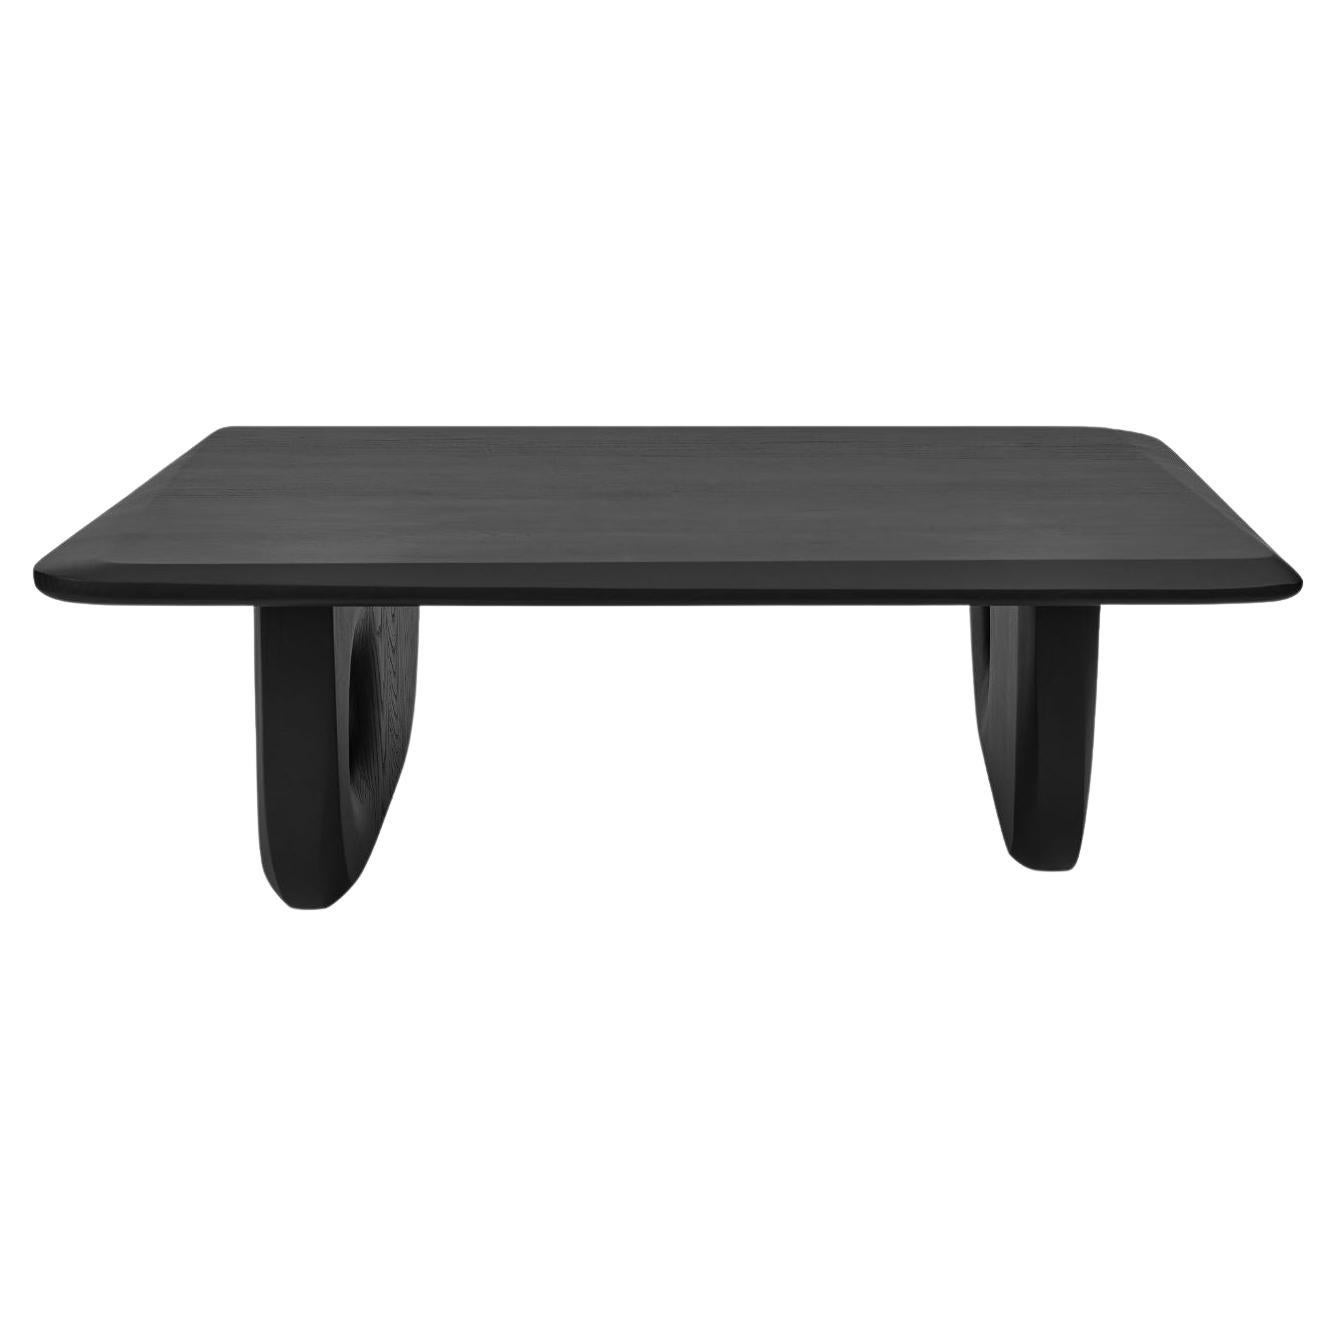 Zomana Low Table M by Contemporary Ecowood